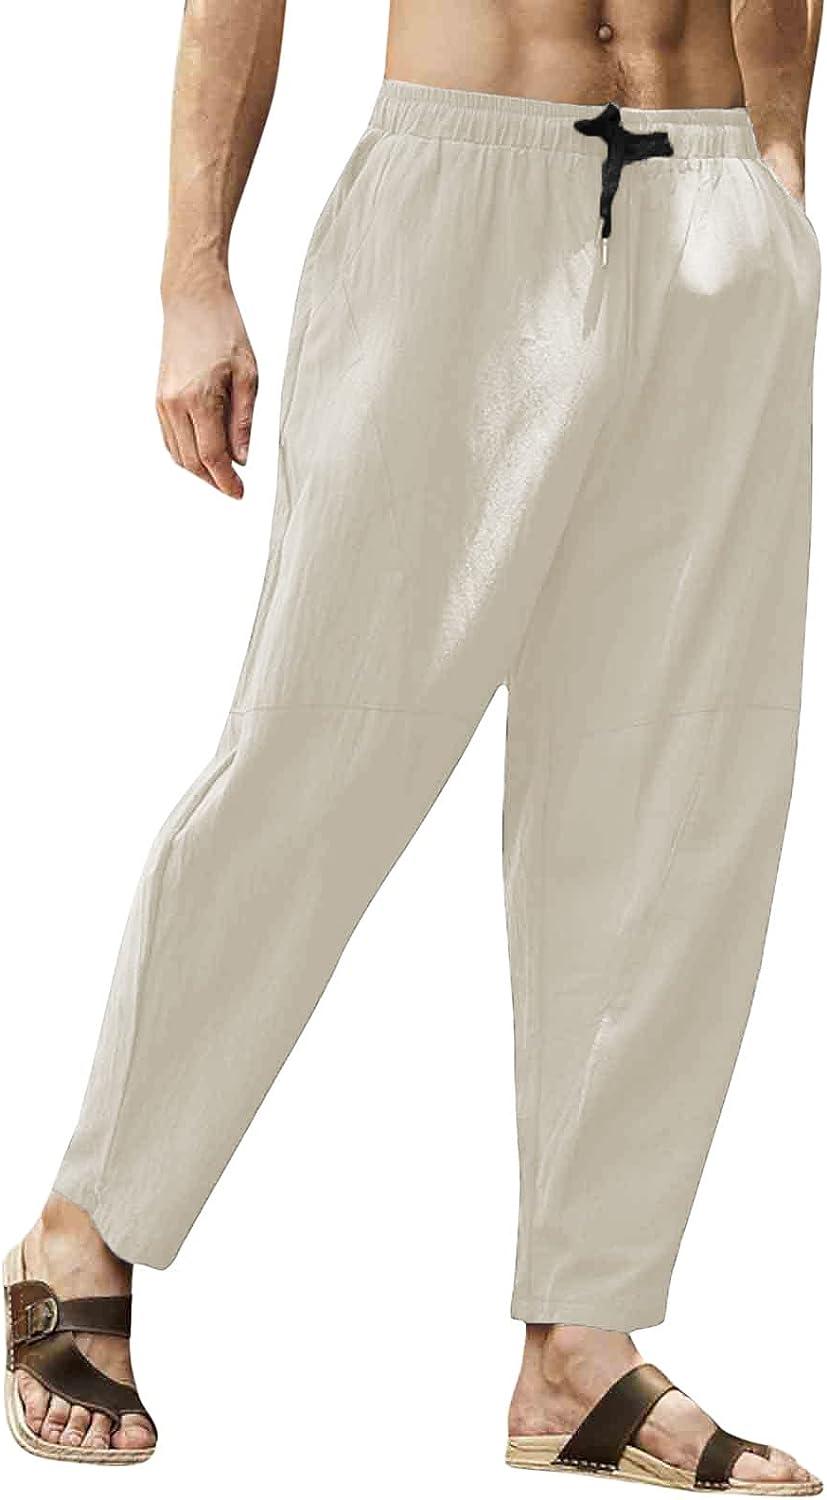 Men's Pants for Summer: 15 Pants to Keep You Cool in the Office